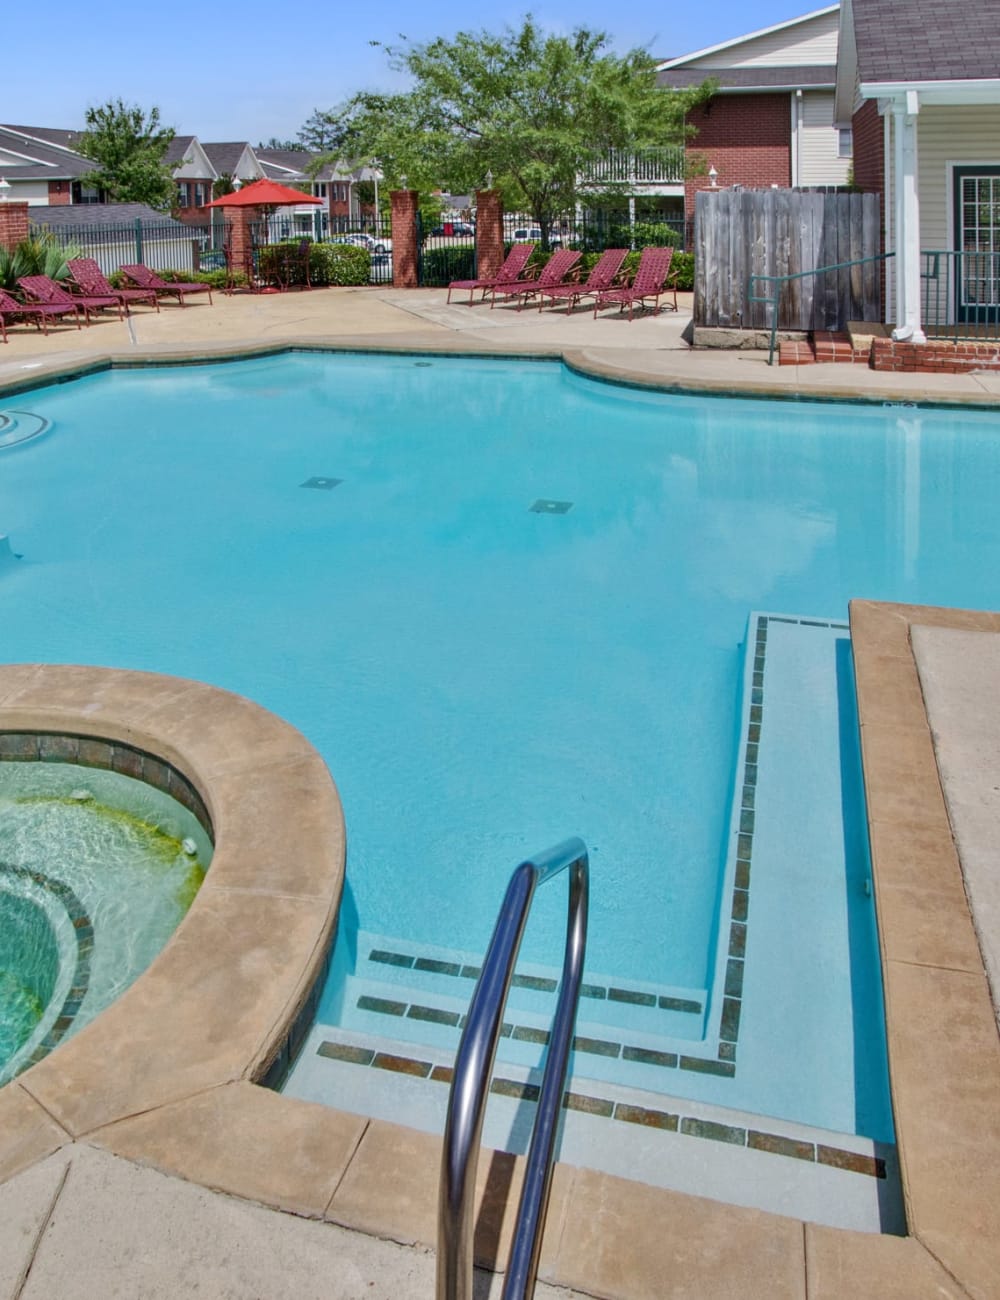 The large community swimming pool at The Gables in Ridgeland, Mississippi